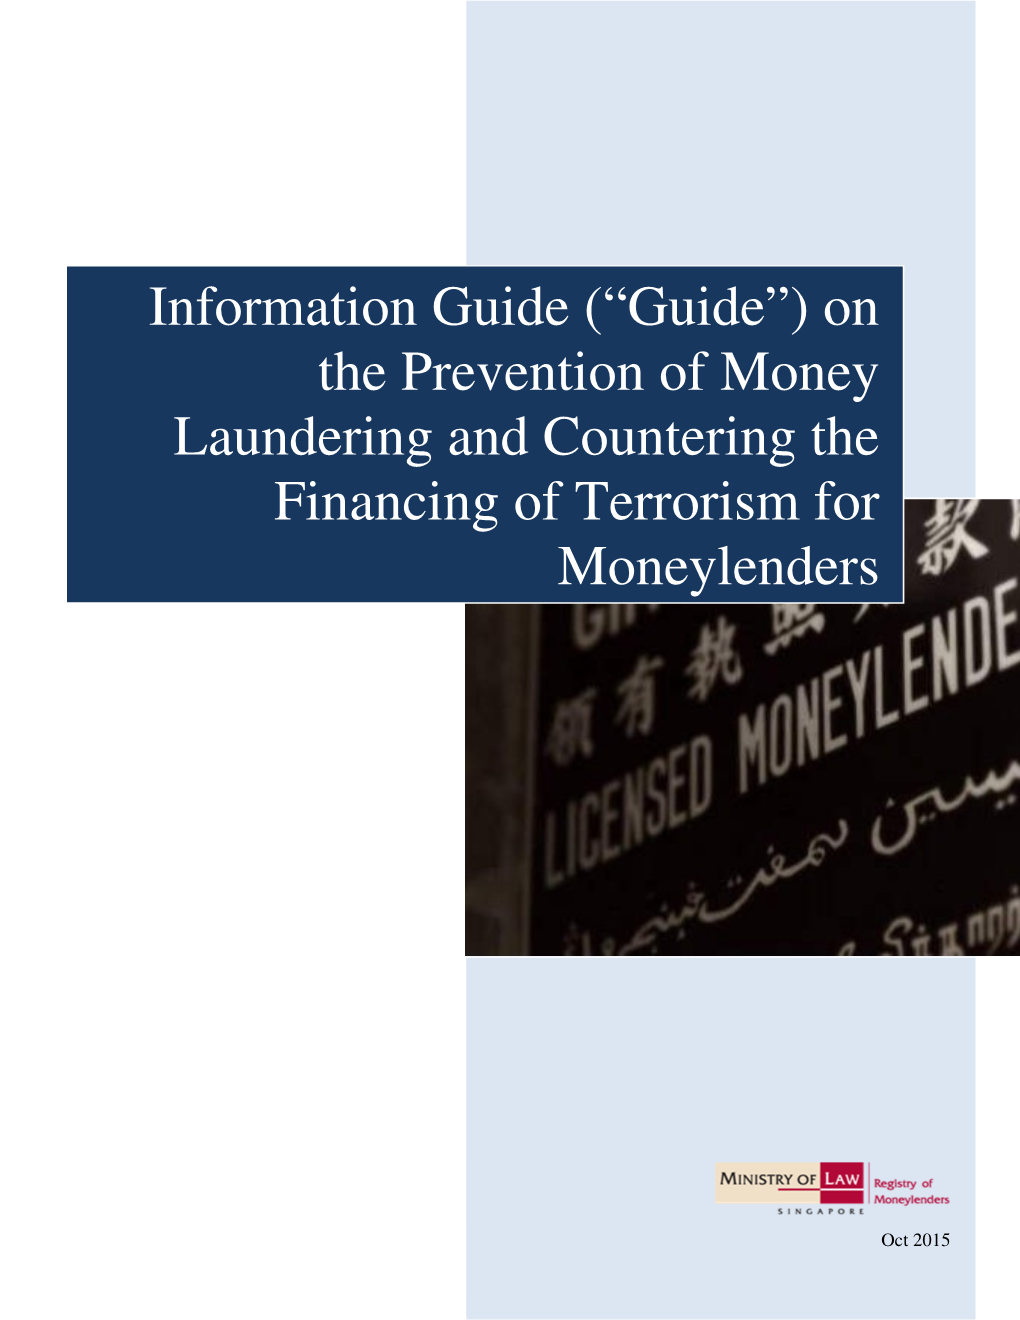 (“Guide”) on the Prevention of Money Laundering and Countering the Financing of Terrorism for Moneylenders